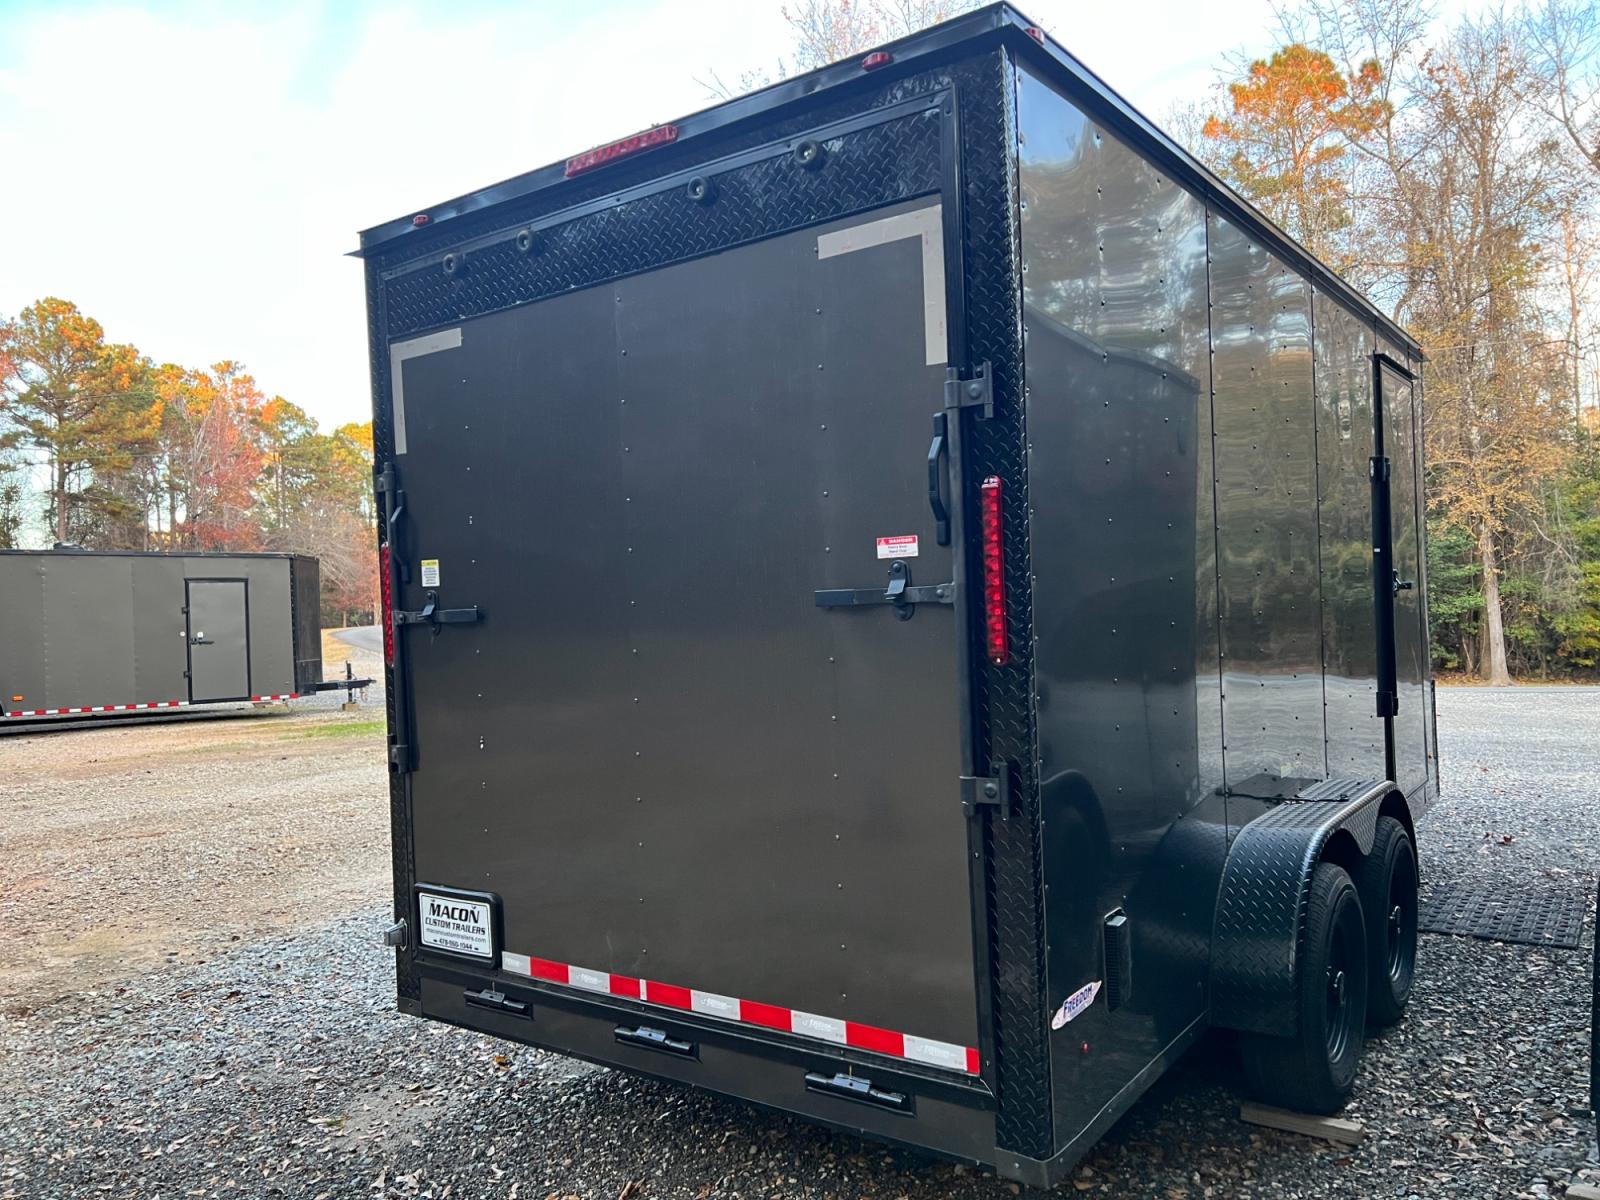 2023 .080 Charcoal Elite Cargo 7ft X 16ft Tandem 5K lb Axles! , located at 1330 Rainey Rd., Macon, 31220, (478) 960-1044, 32.845638, -83.778687 - Brand New 2023 "Top of the Line" Elite Cargo Trailer, Made in South Ga. Awesome 7ft X 16ft Tandem Enclosed Cycle Hauler & Cargo Trailer! Taller Inside Height is 7ft 6" Tall Inside & the Ramp Door Clearance is 7ft, at the Back Door! Up-Graded Larger 5k lb Dexter Brake Axles! Larger 225/75/15" 10 - Photo #2